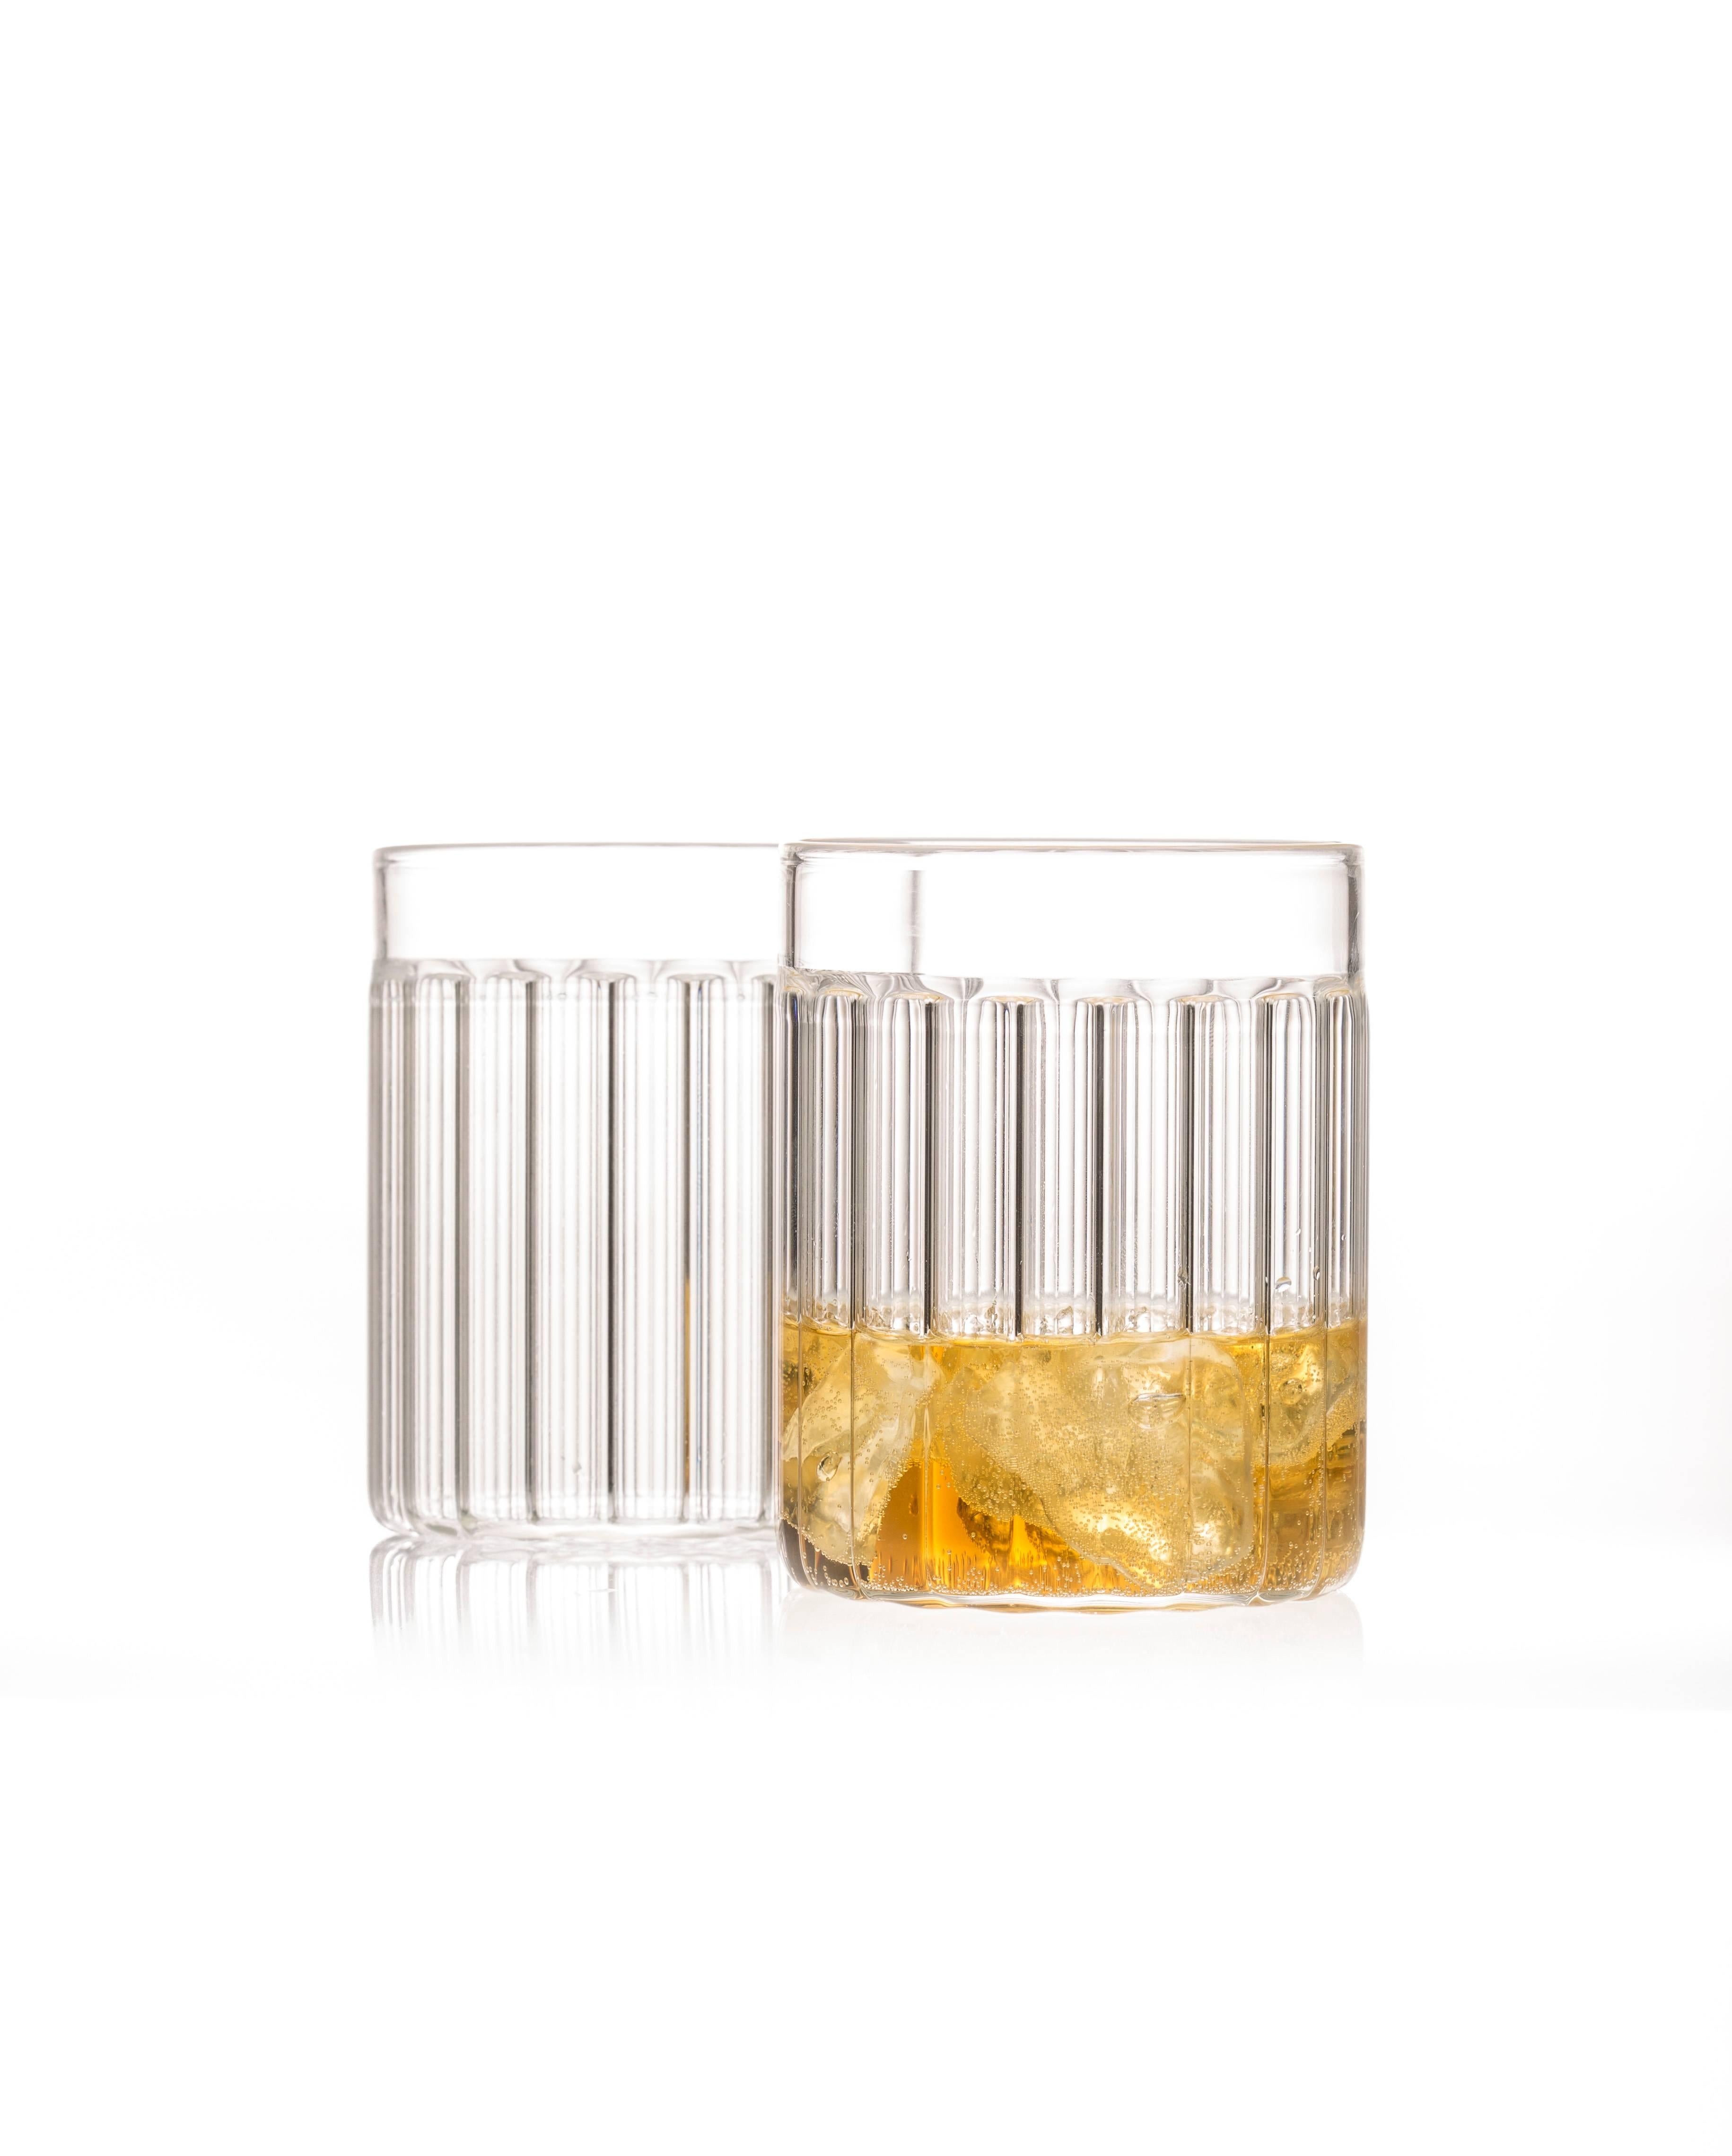 This Czech contemporary clear glass set includes six Bessho Collins glasses and six Bessho Tumblers 

Just as the small town is known for the healing properties of its hot springs, so are the evenings we spend with good friends. The contemporary,